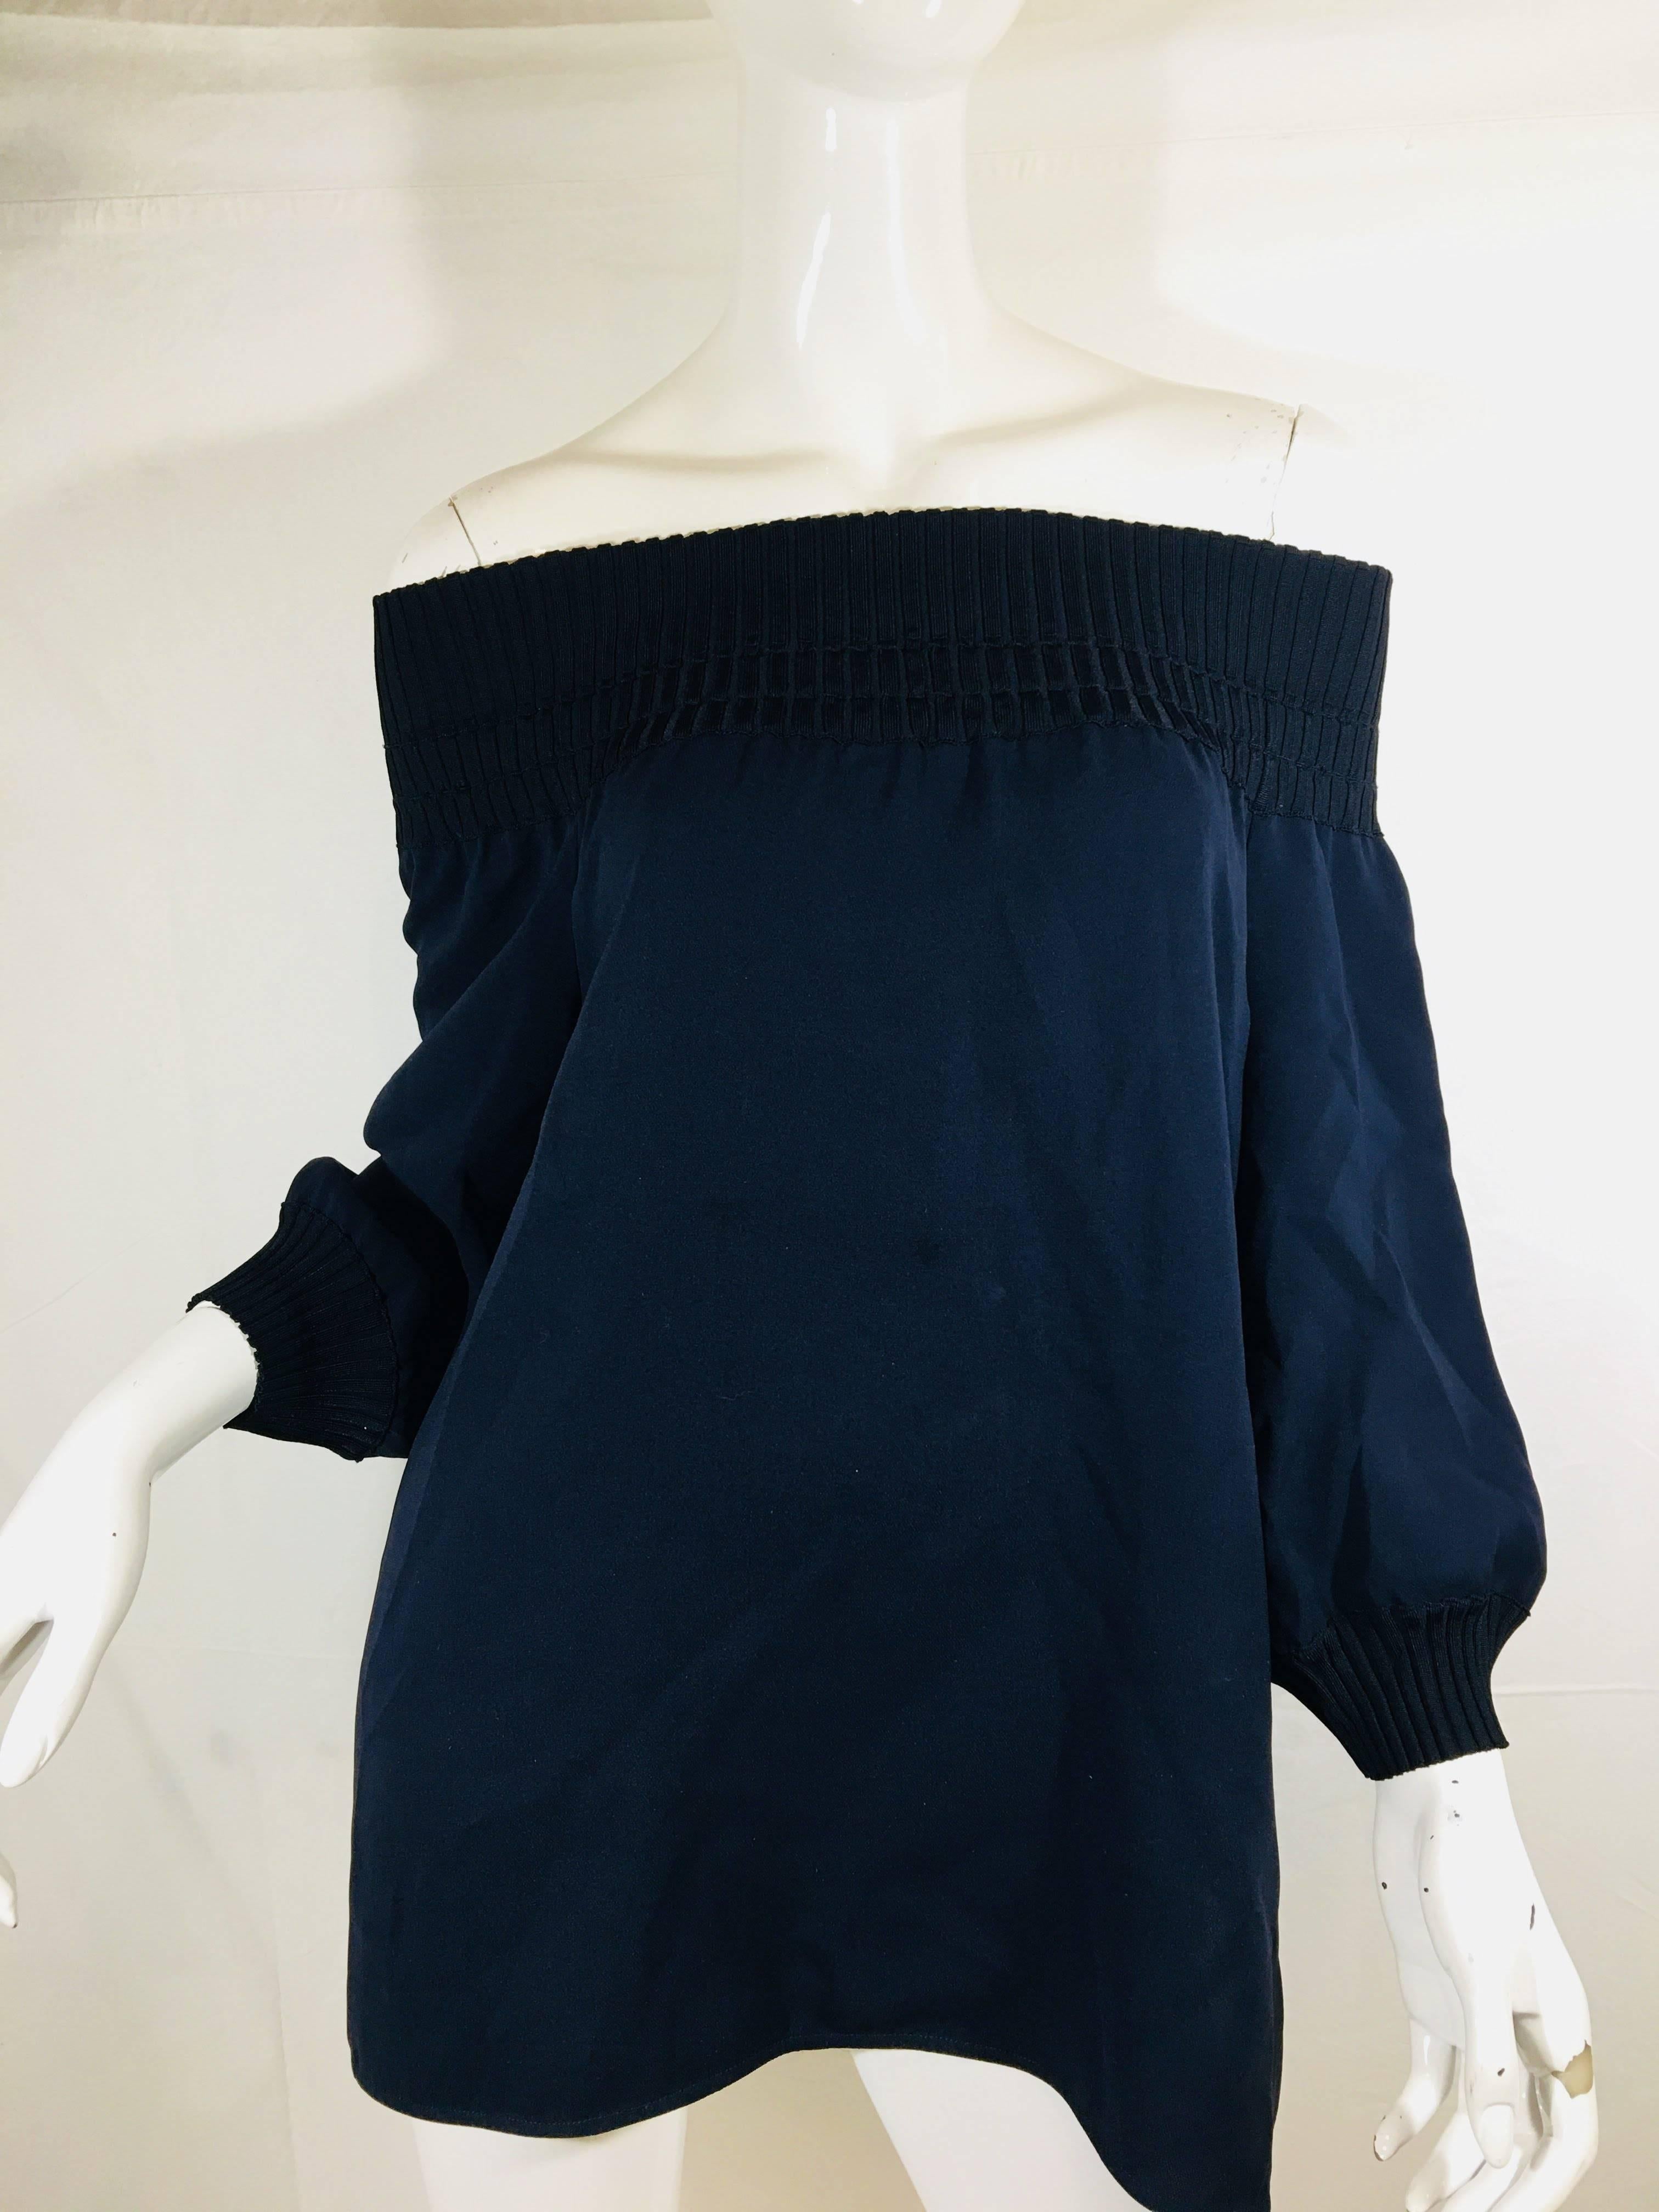 Lafayette 148 New York Off the Shoulder Silk Top with 3/4 Sleeves.